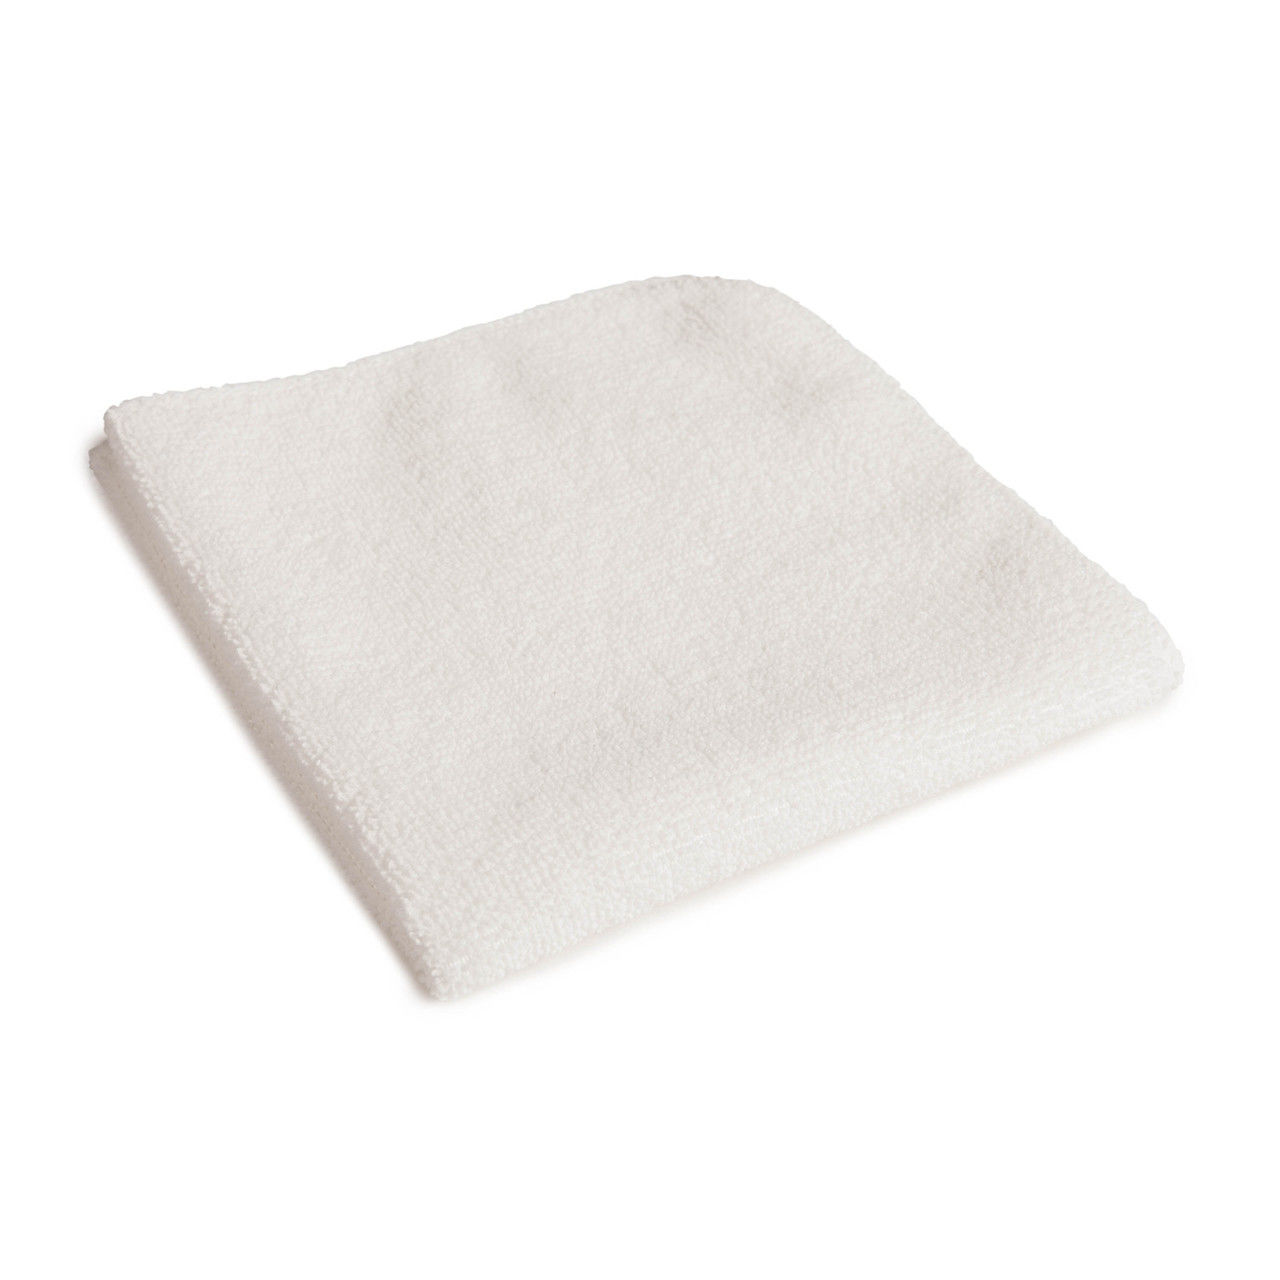 What feature ensures a long-lasting wear-life for these dairy towels?